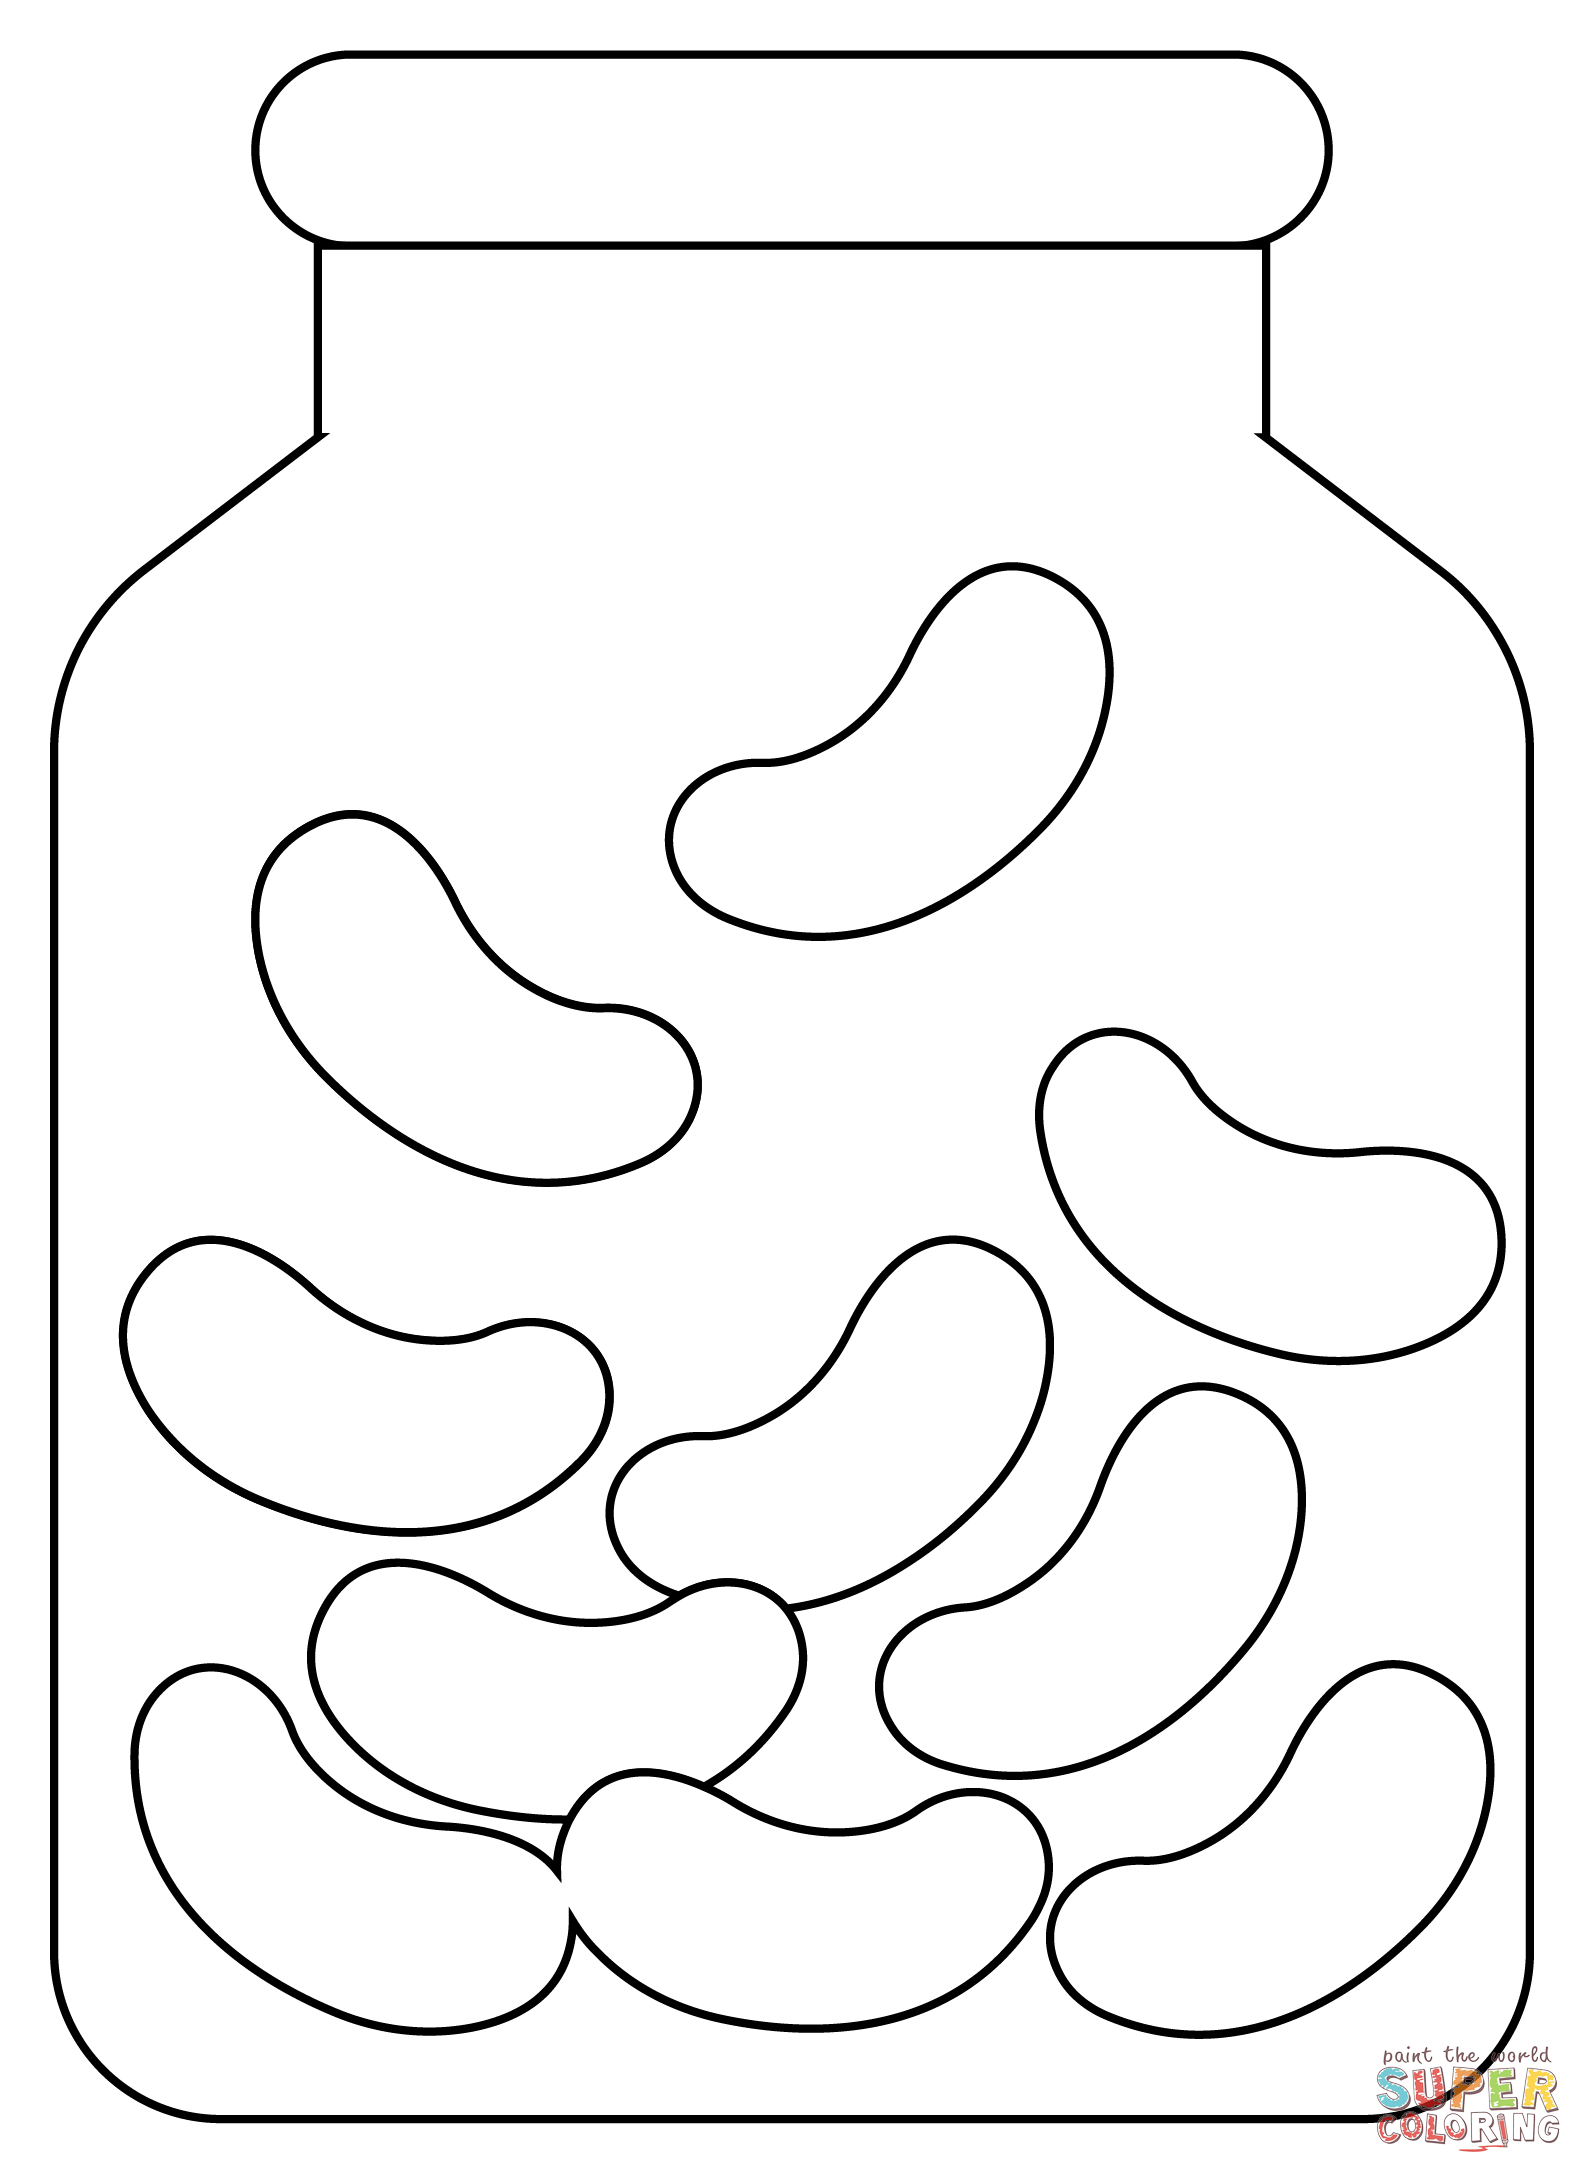 Jelly beans coloring page free printable coloring pages